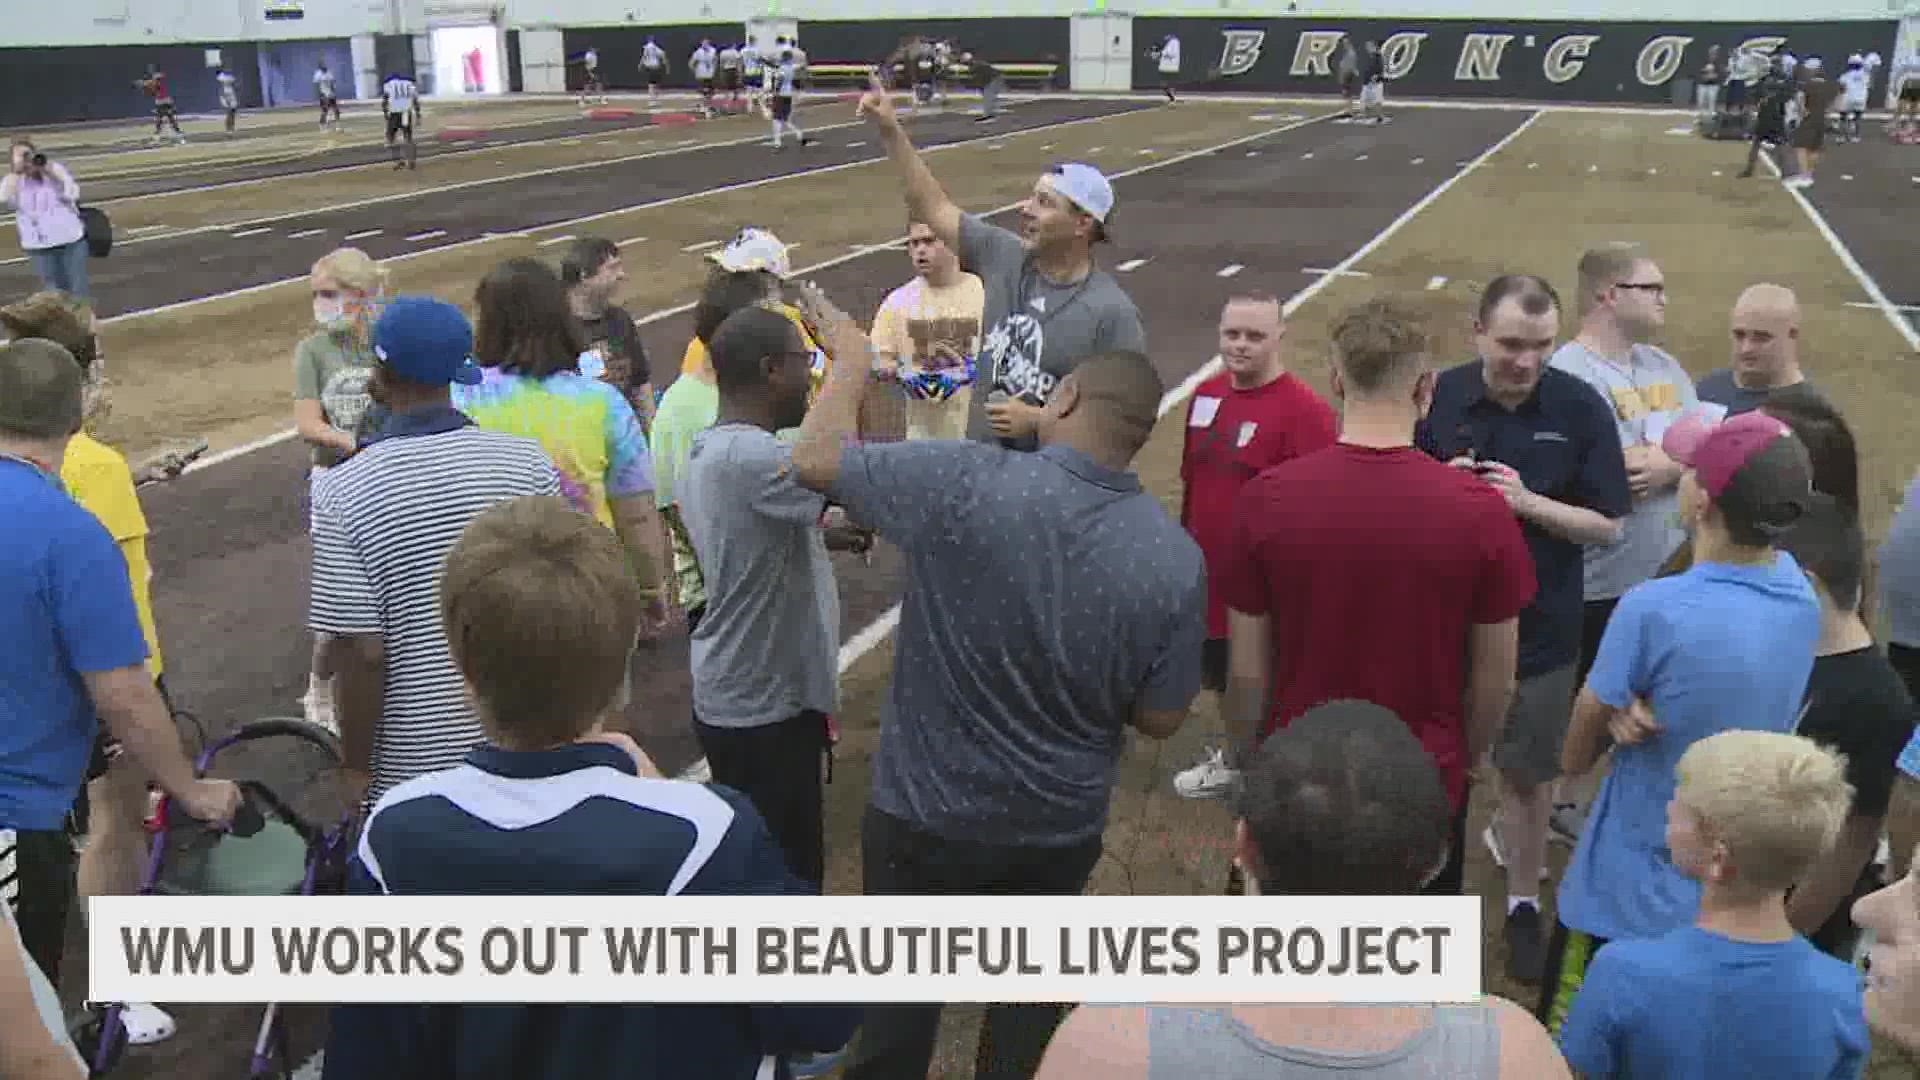 The Broncos welcomed 40 children and adults with disabilities to work out with them.